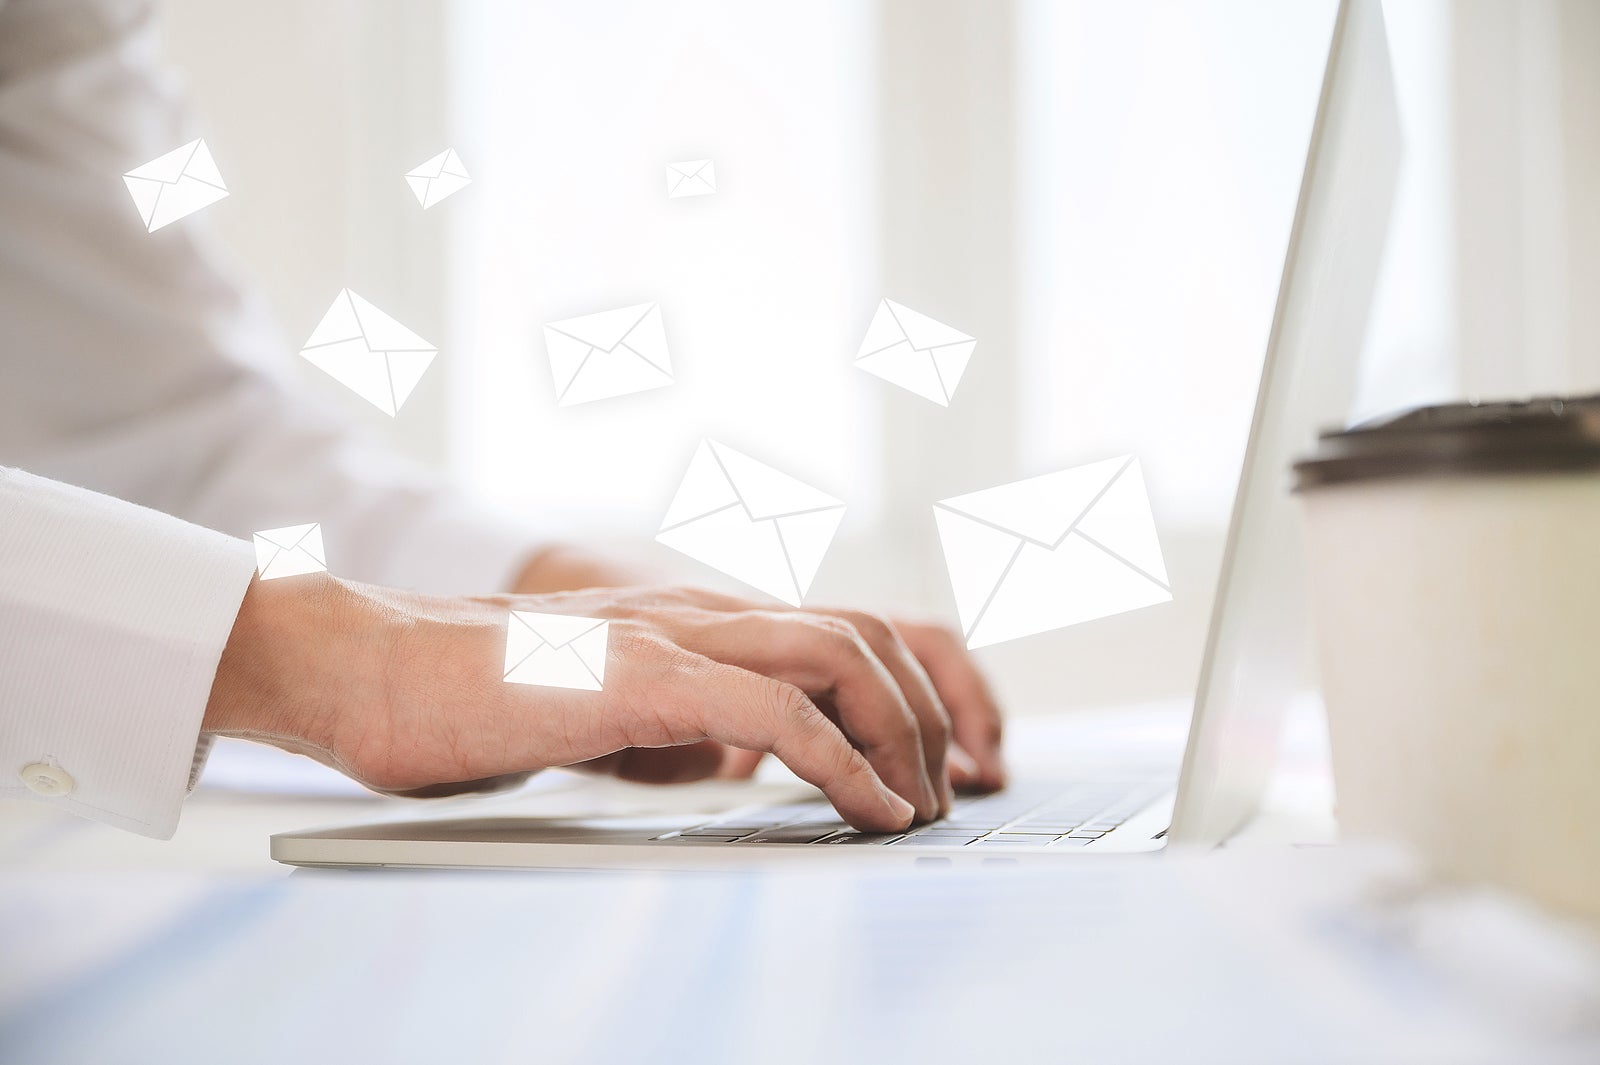 6 Practical Tips to Organize Your Gmail Inbox